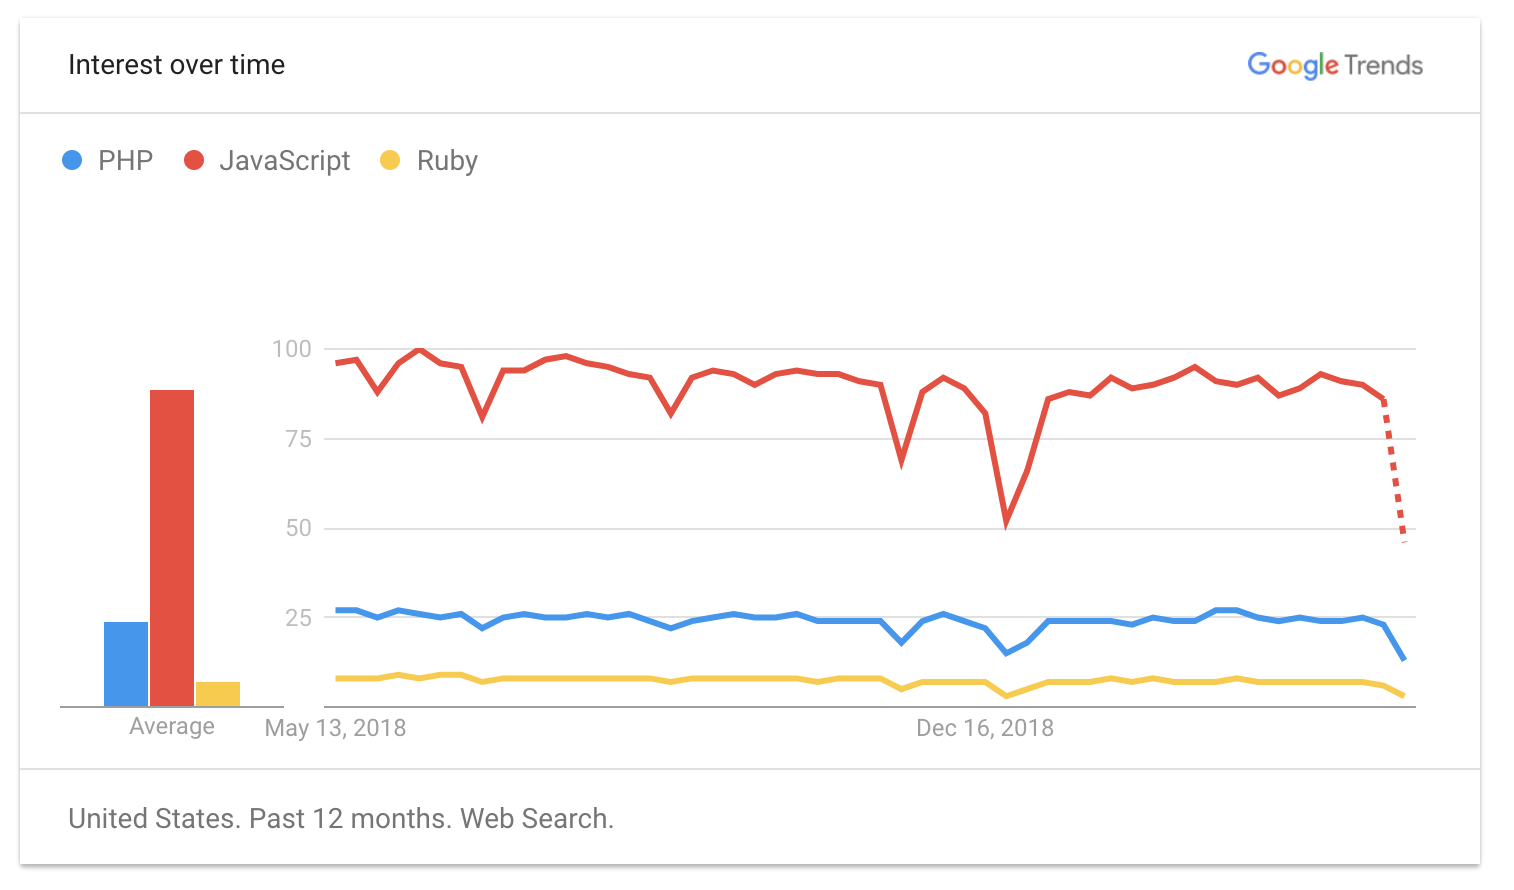 Google Trends: PHP, JS, Ruby